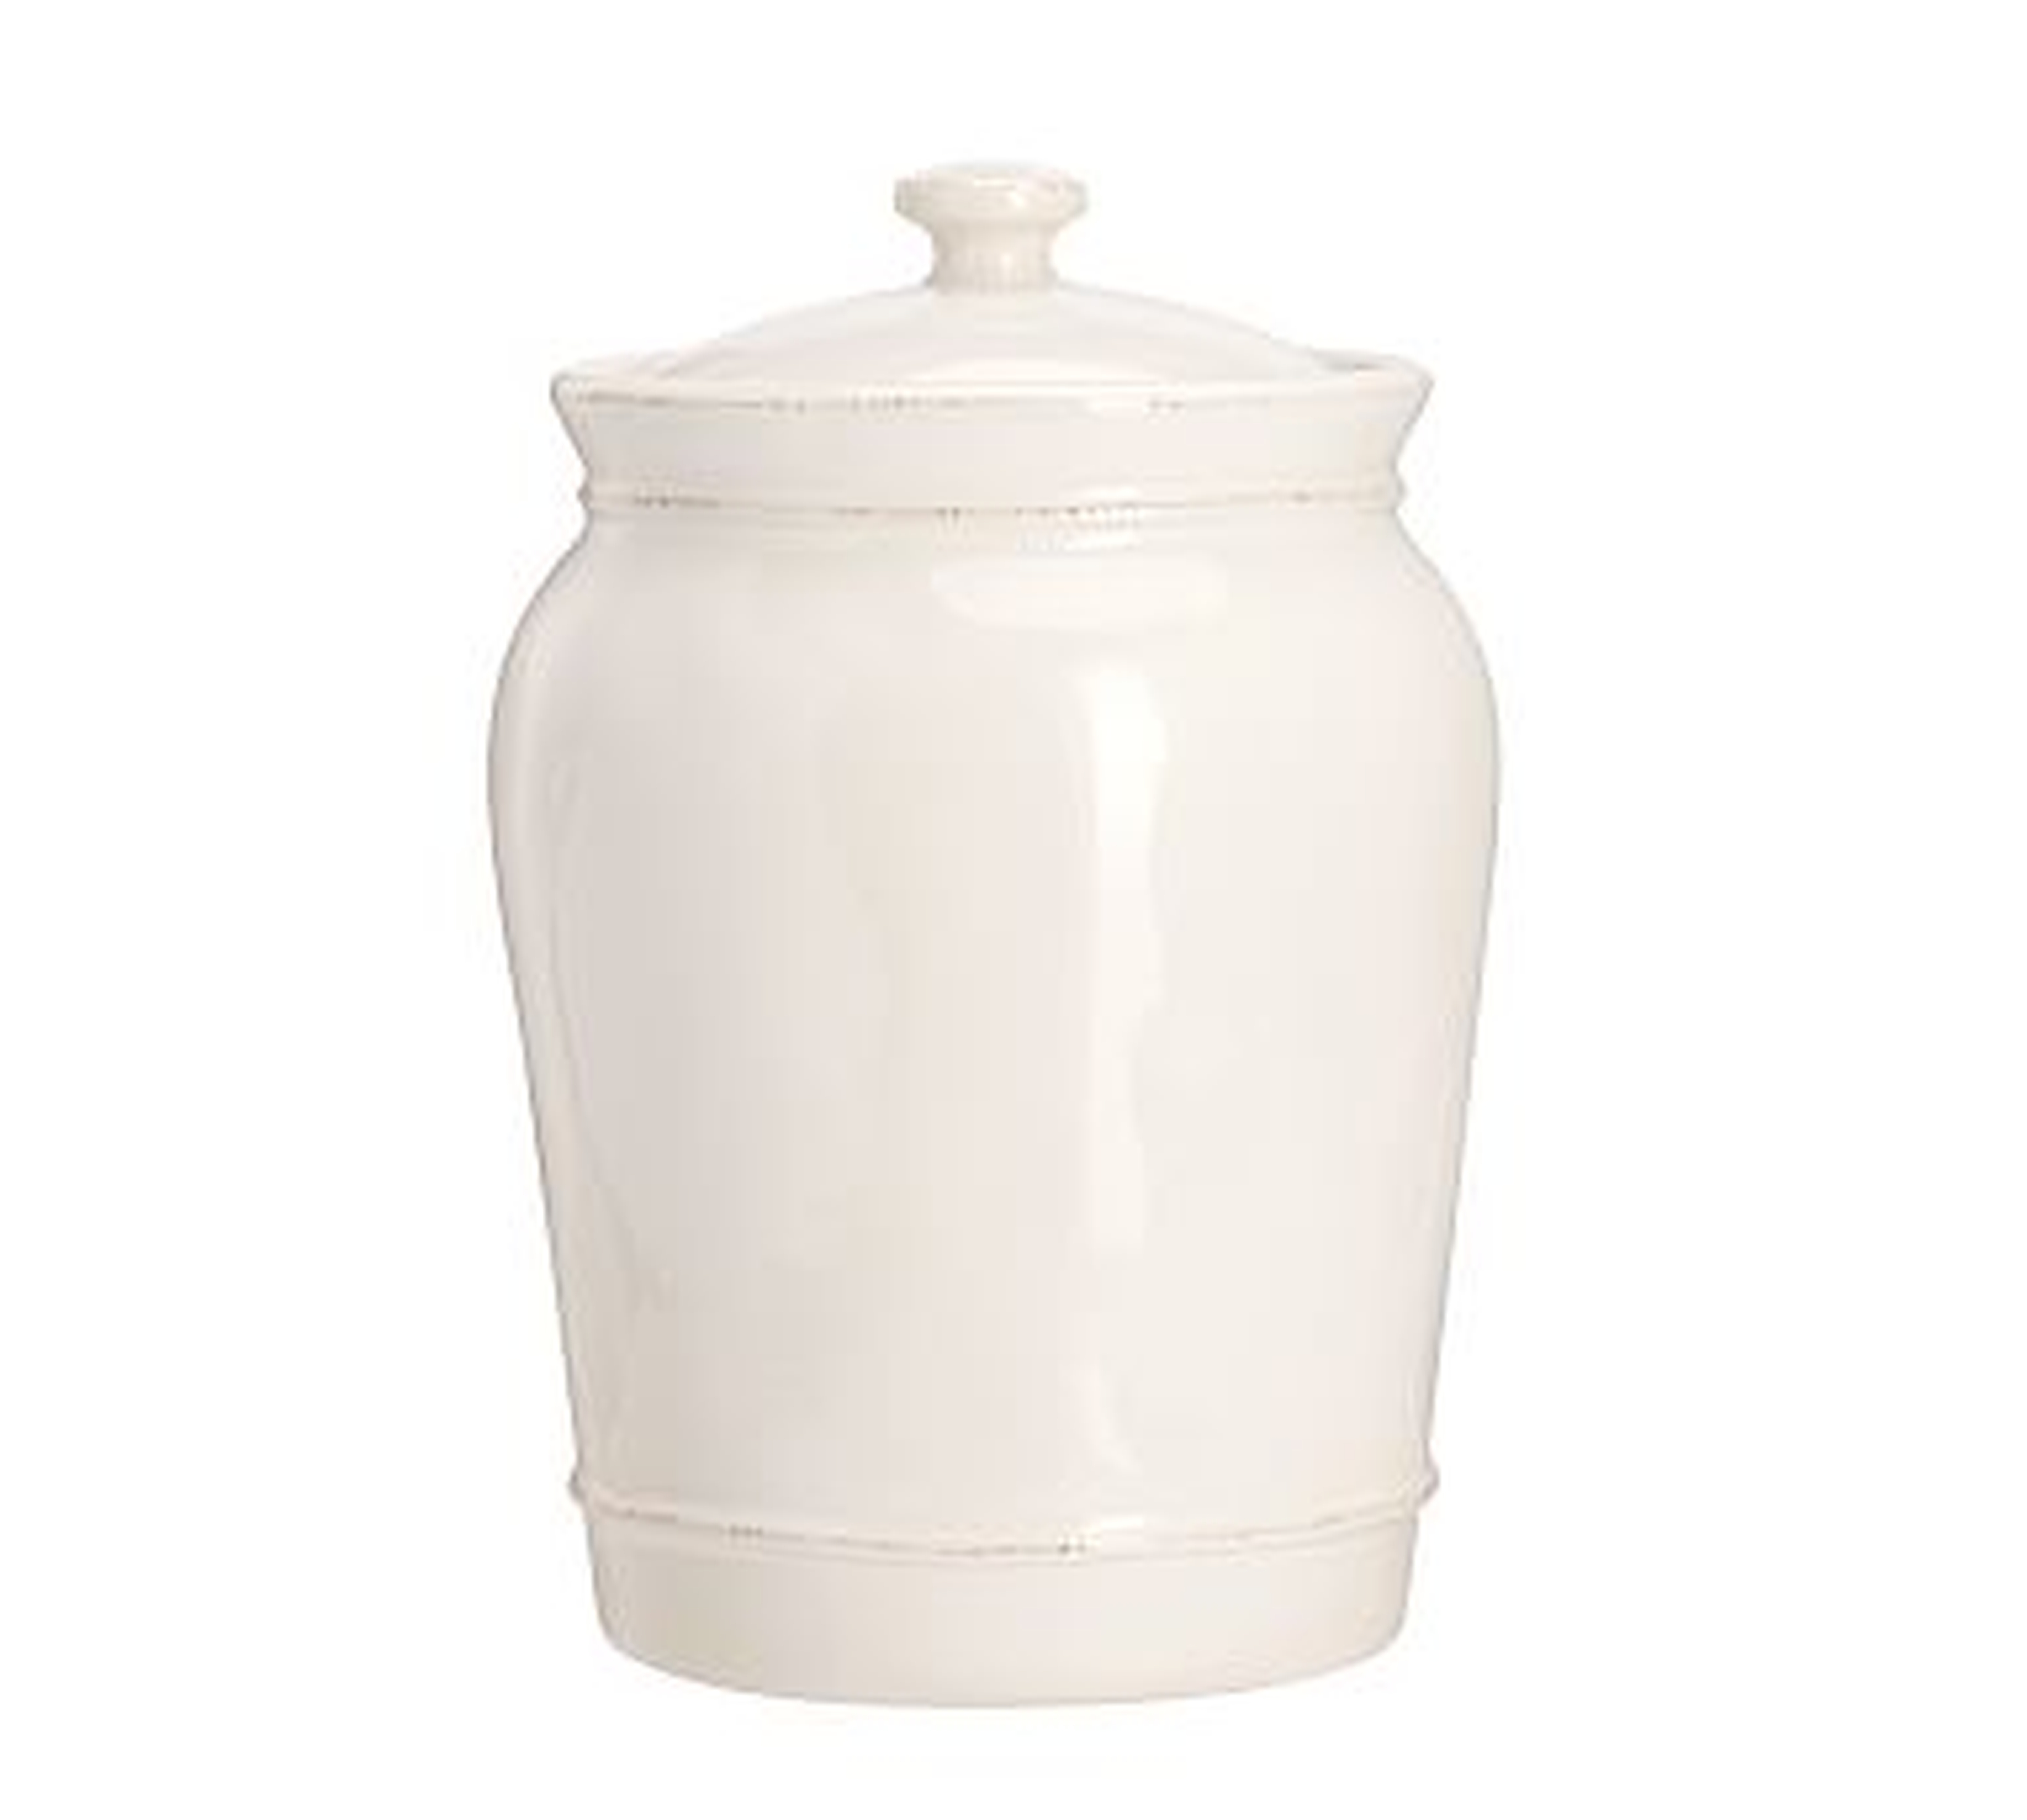 Cambria Canister, Tall, Stone - Pottery Barn